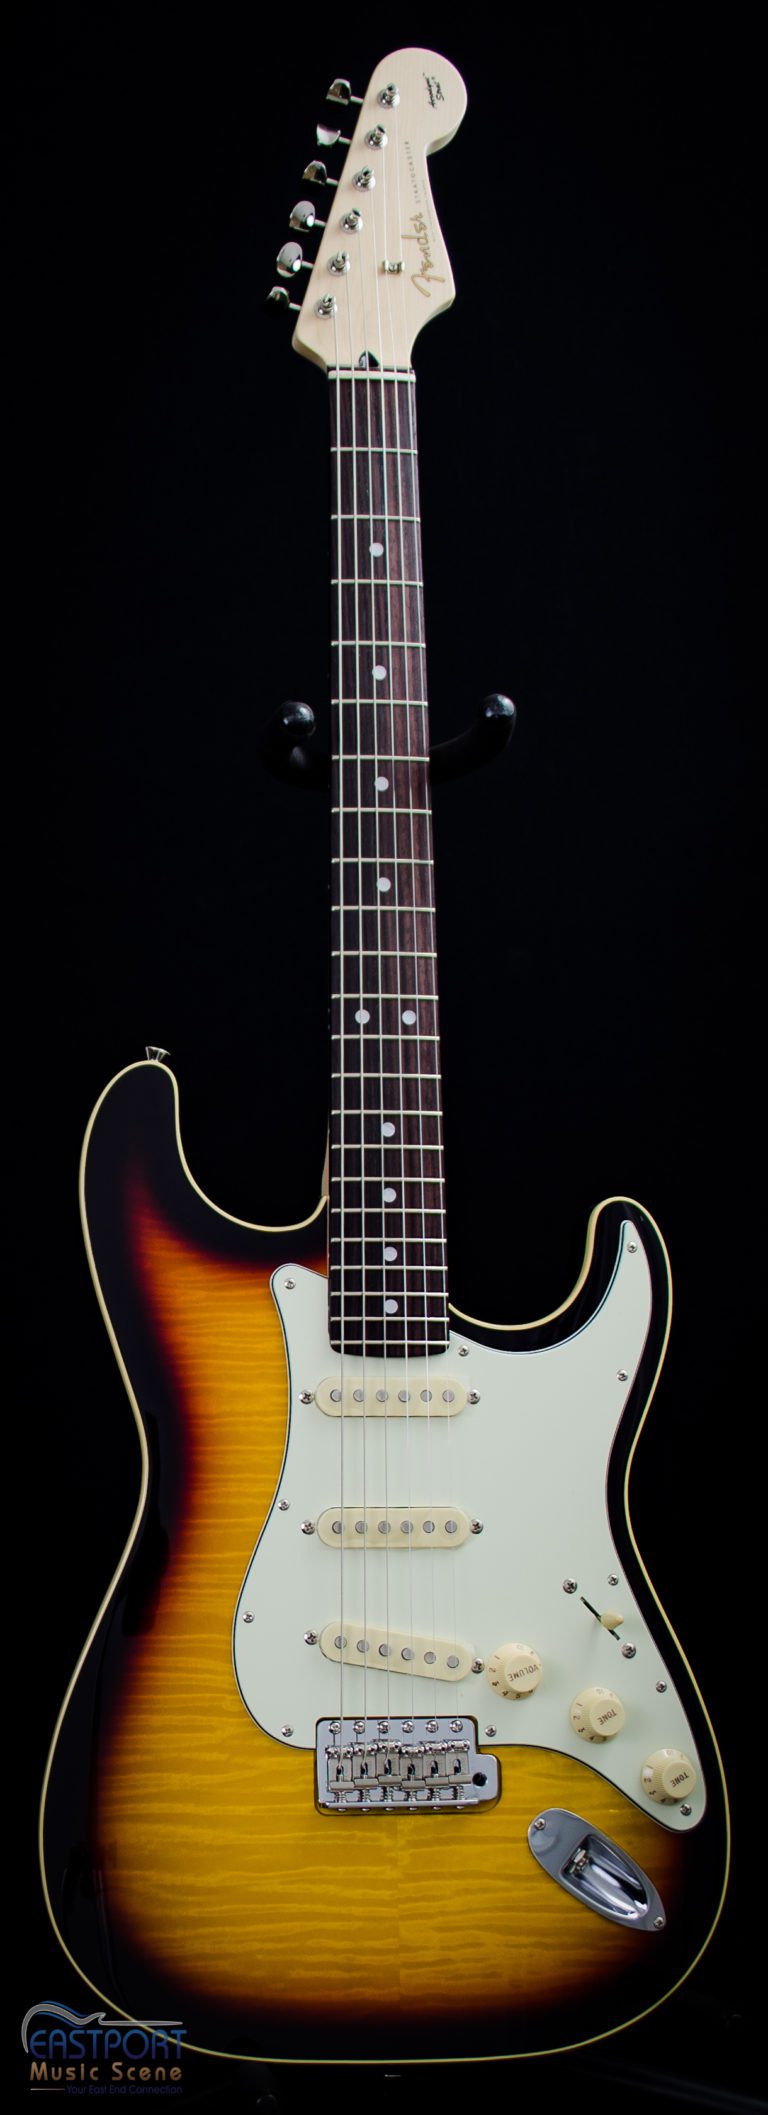 A guitar is shown with the strings missing.